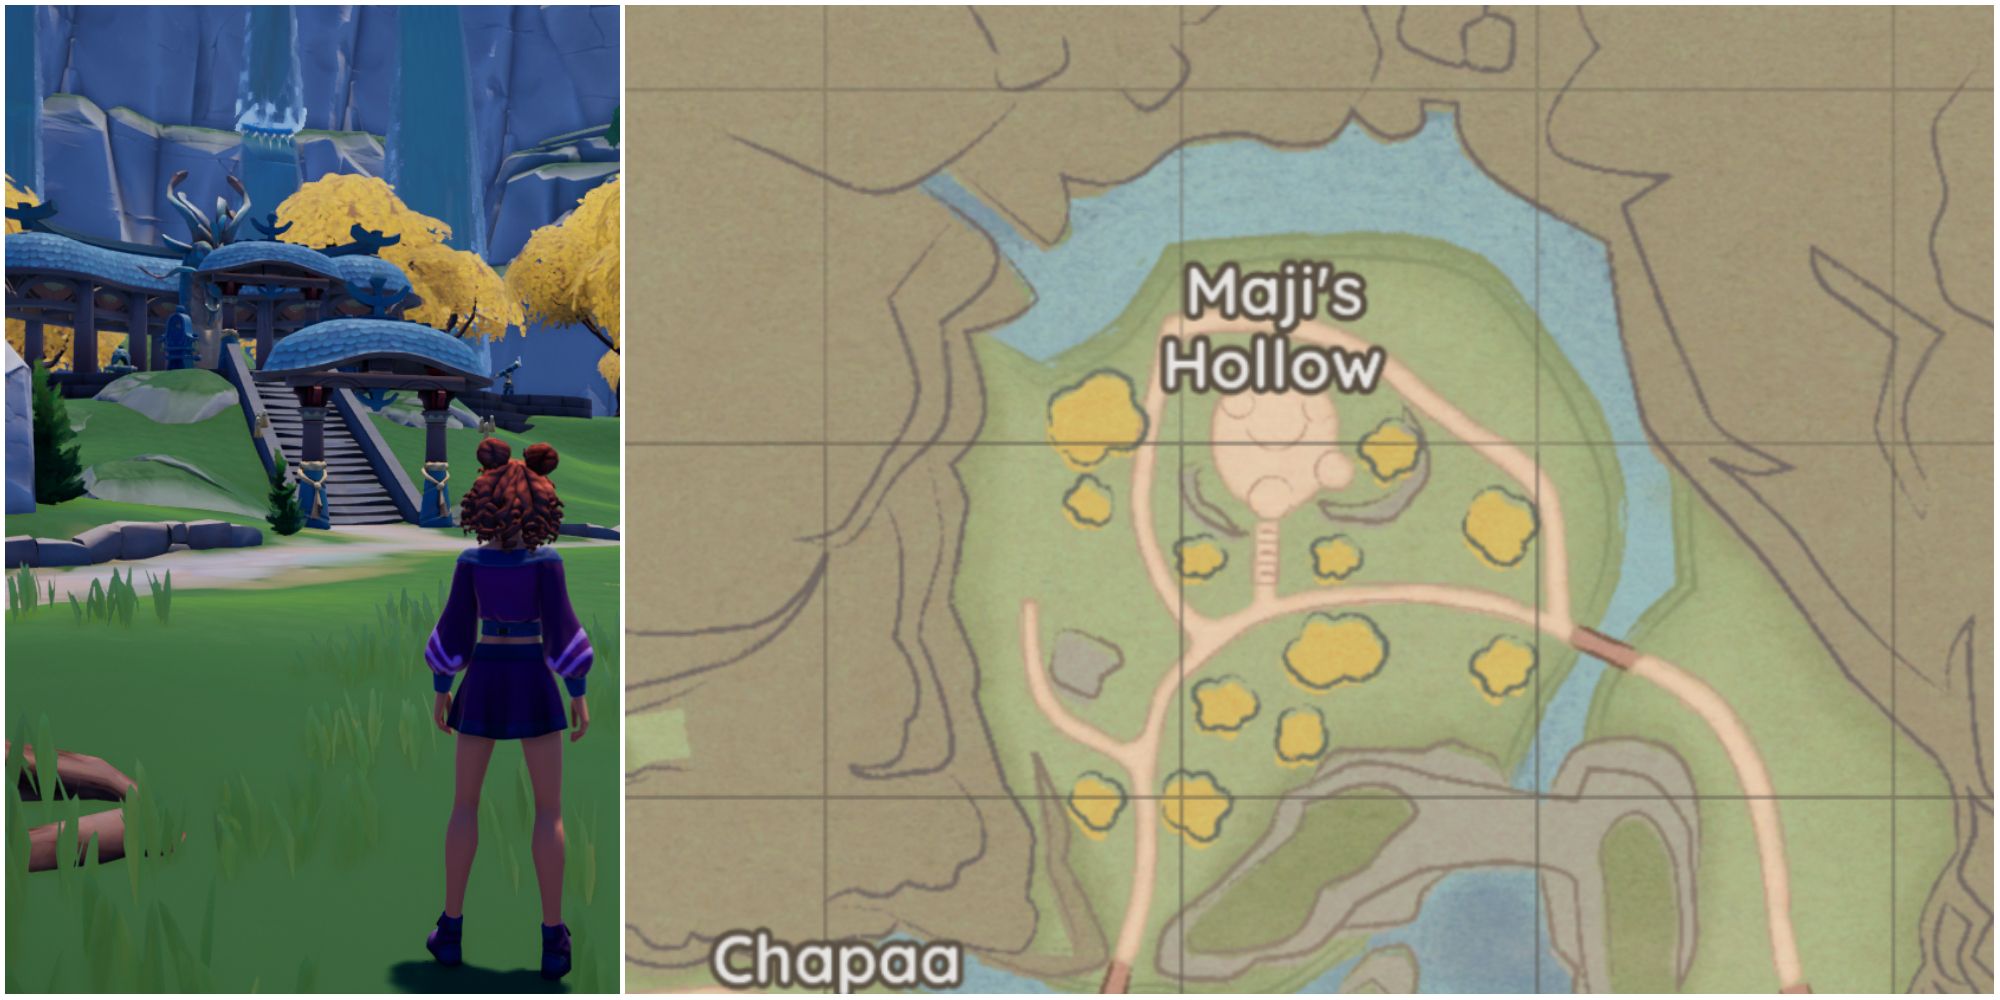 The map showing Maji's Hollow, one of the best places to catch bugs